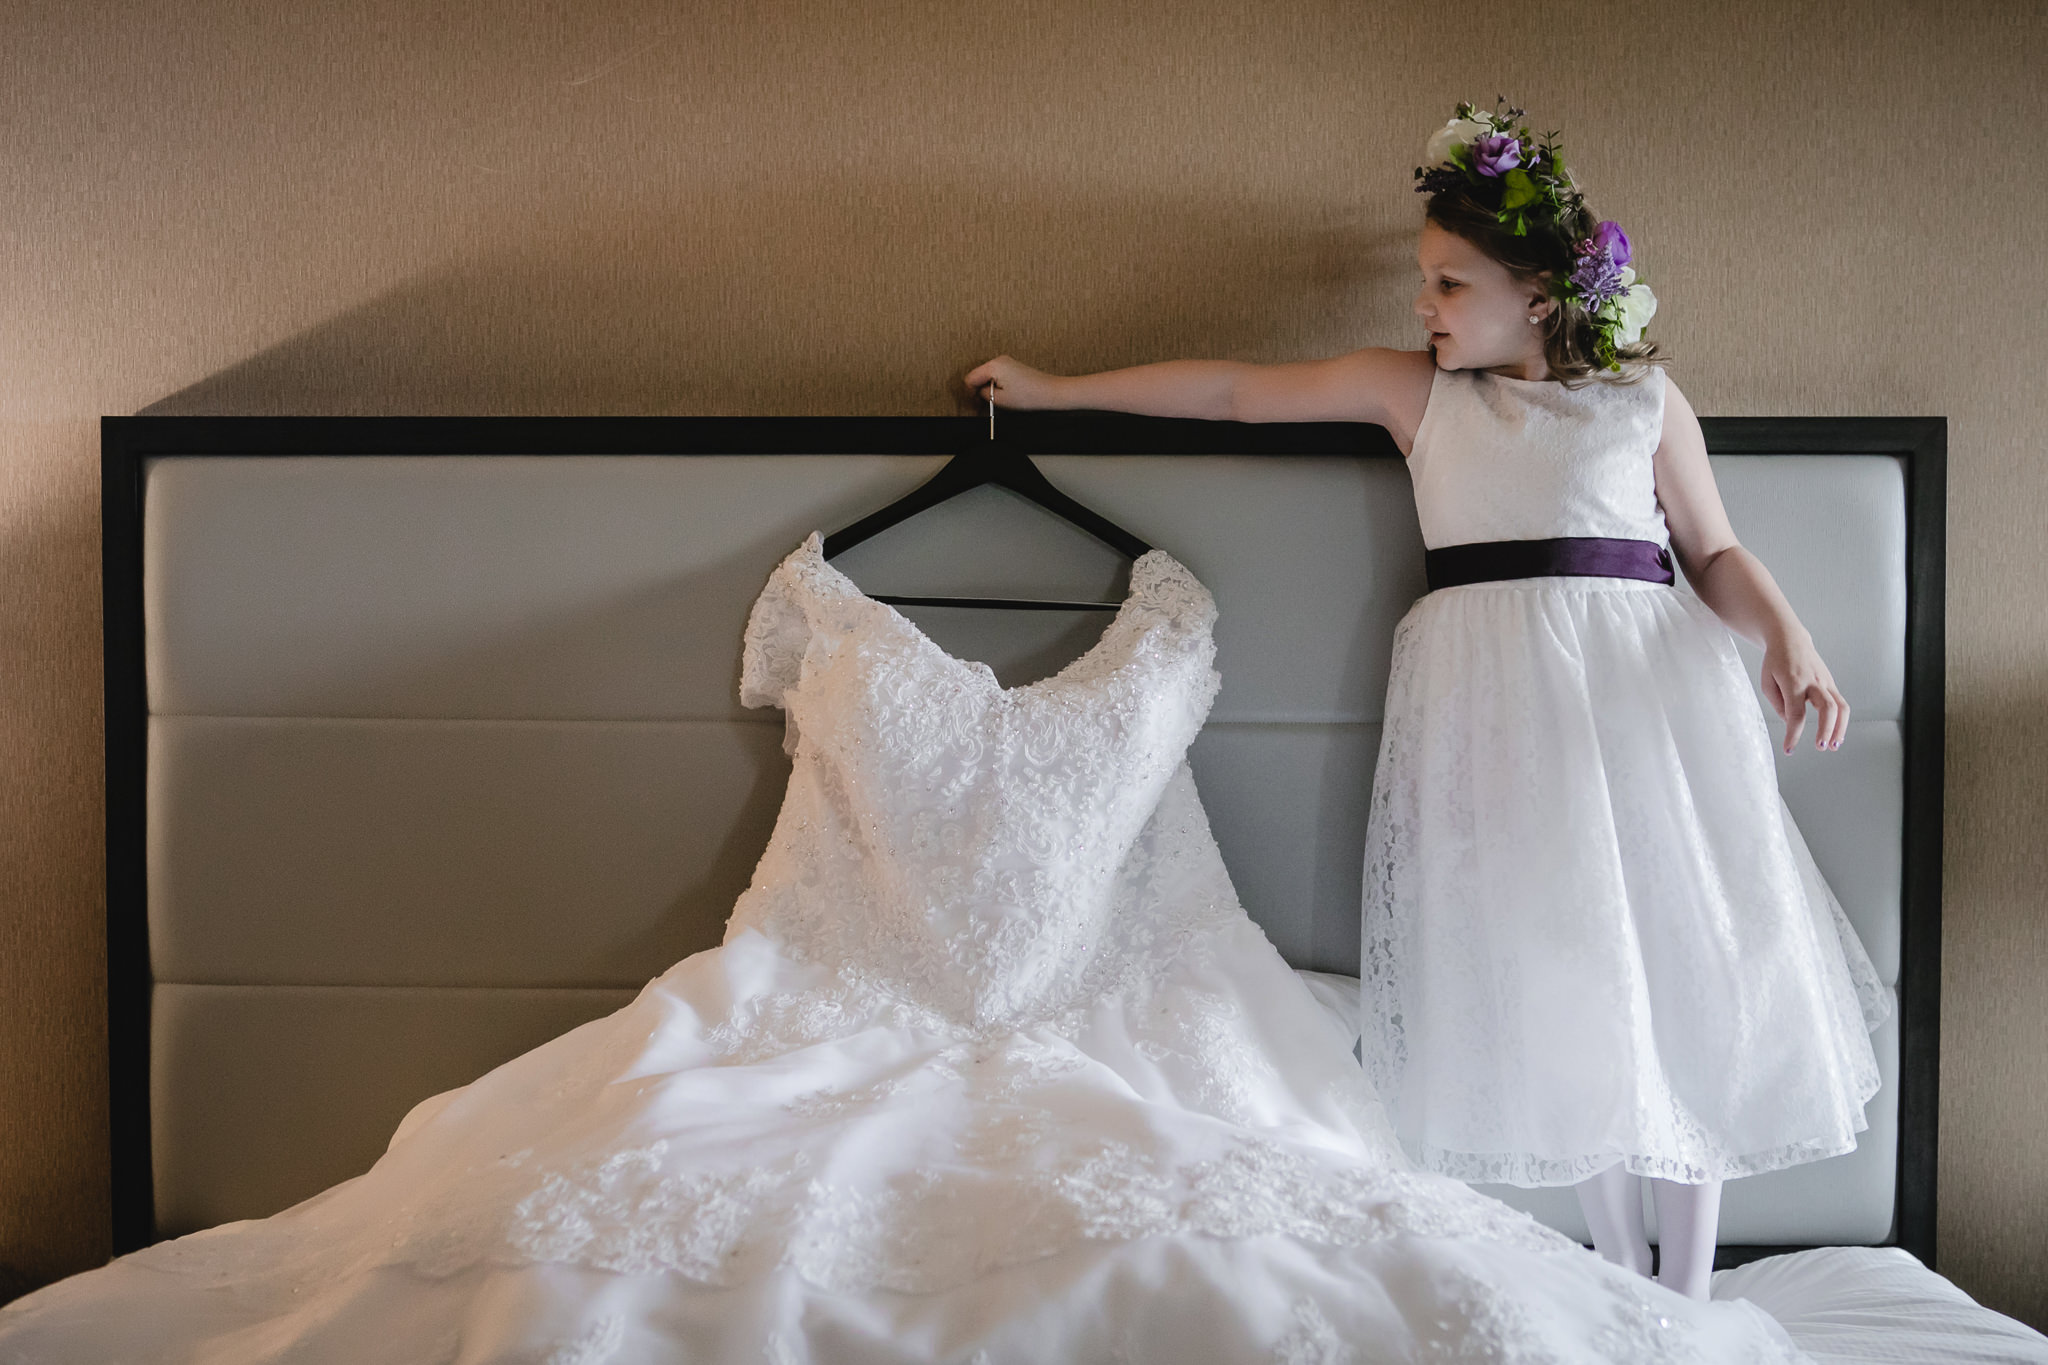 Flower girl holds up bride's dress before her Robinson Township wedding